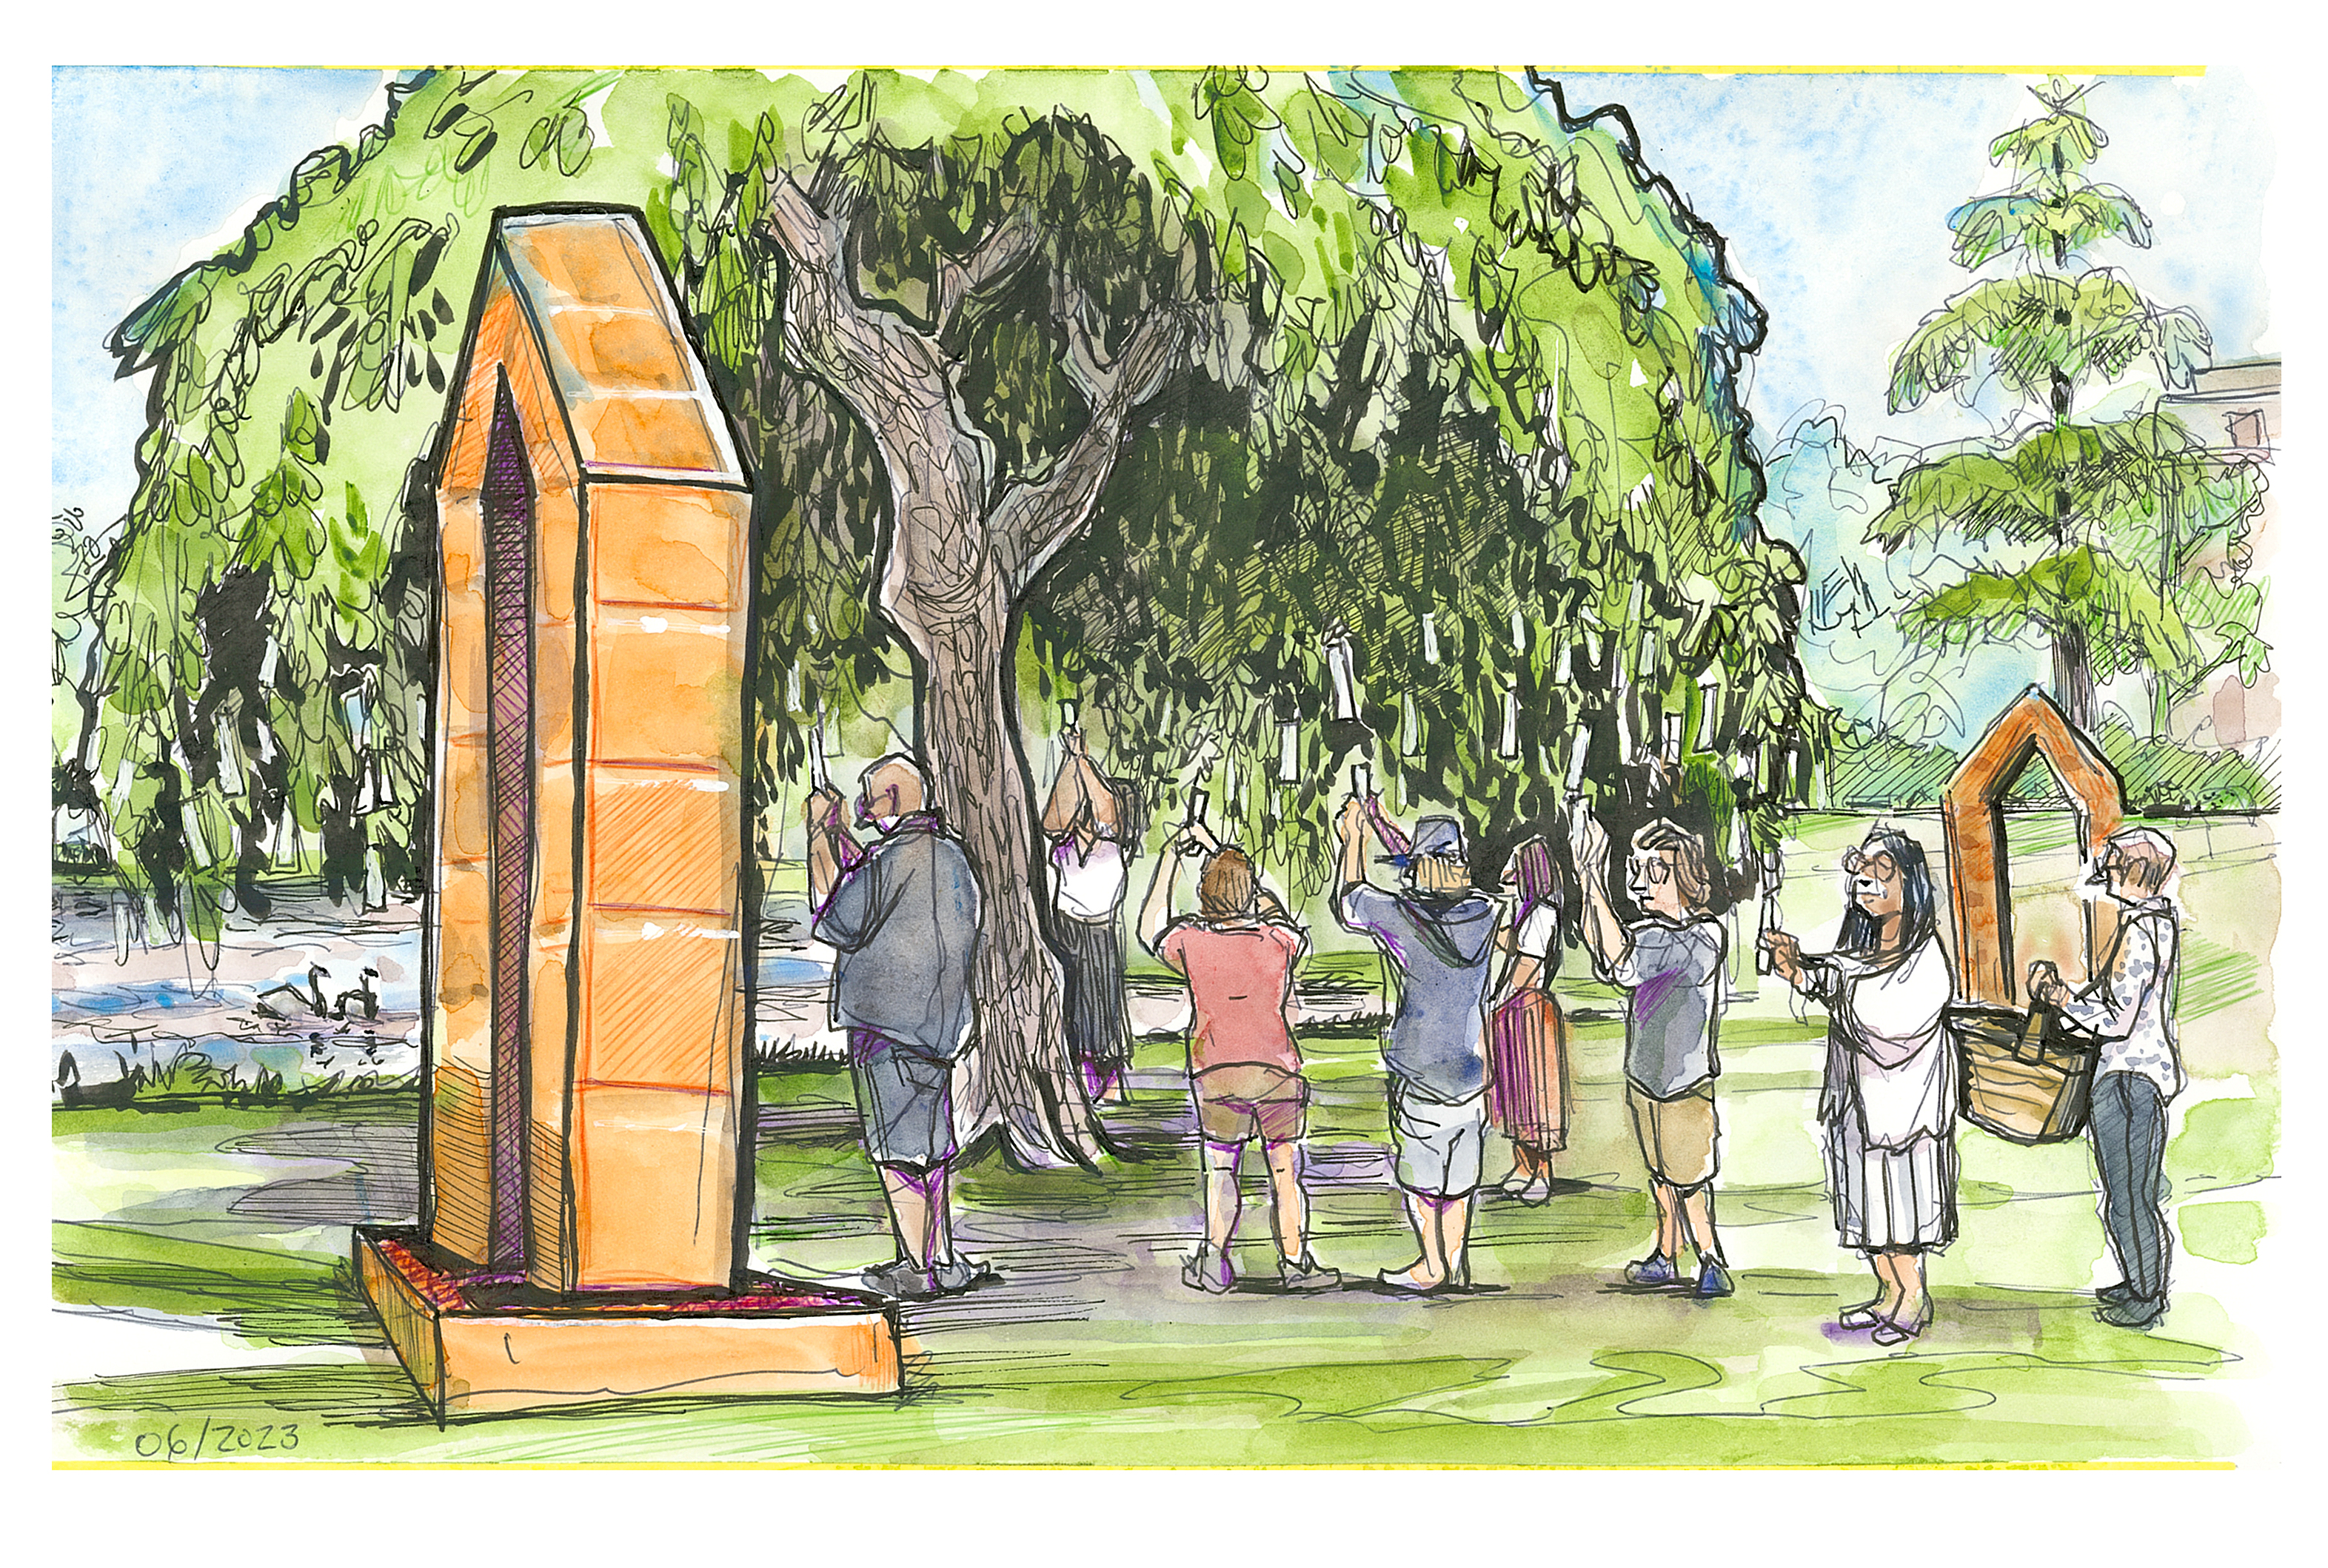 Sketch of attendees attaching memorial tags with the names of enslaved peoples to a tree at the Duck Pond near Solitude